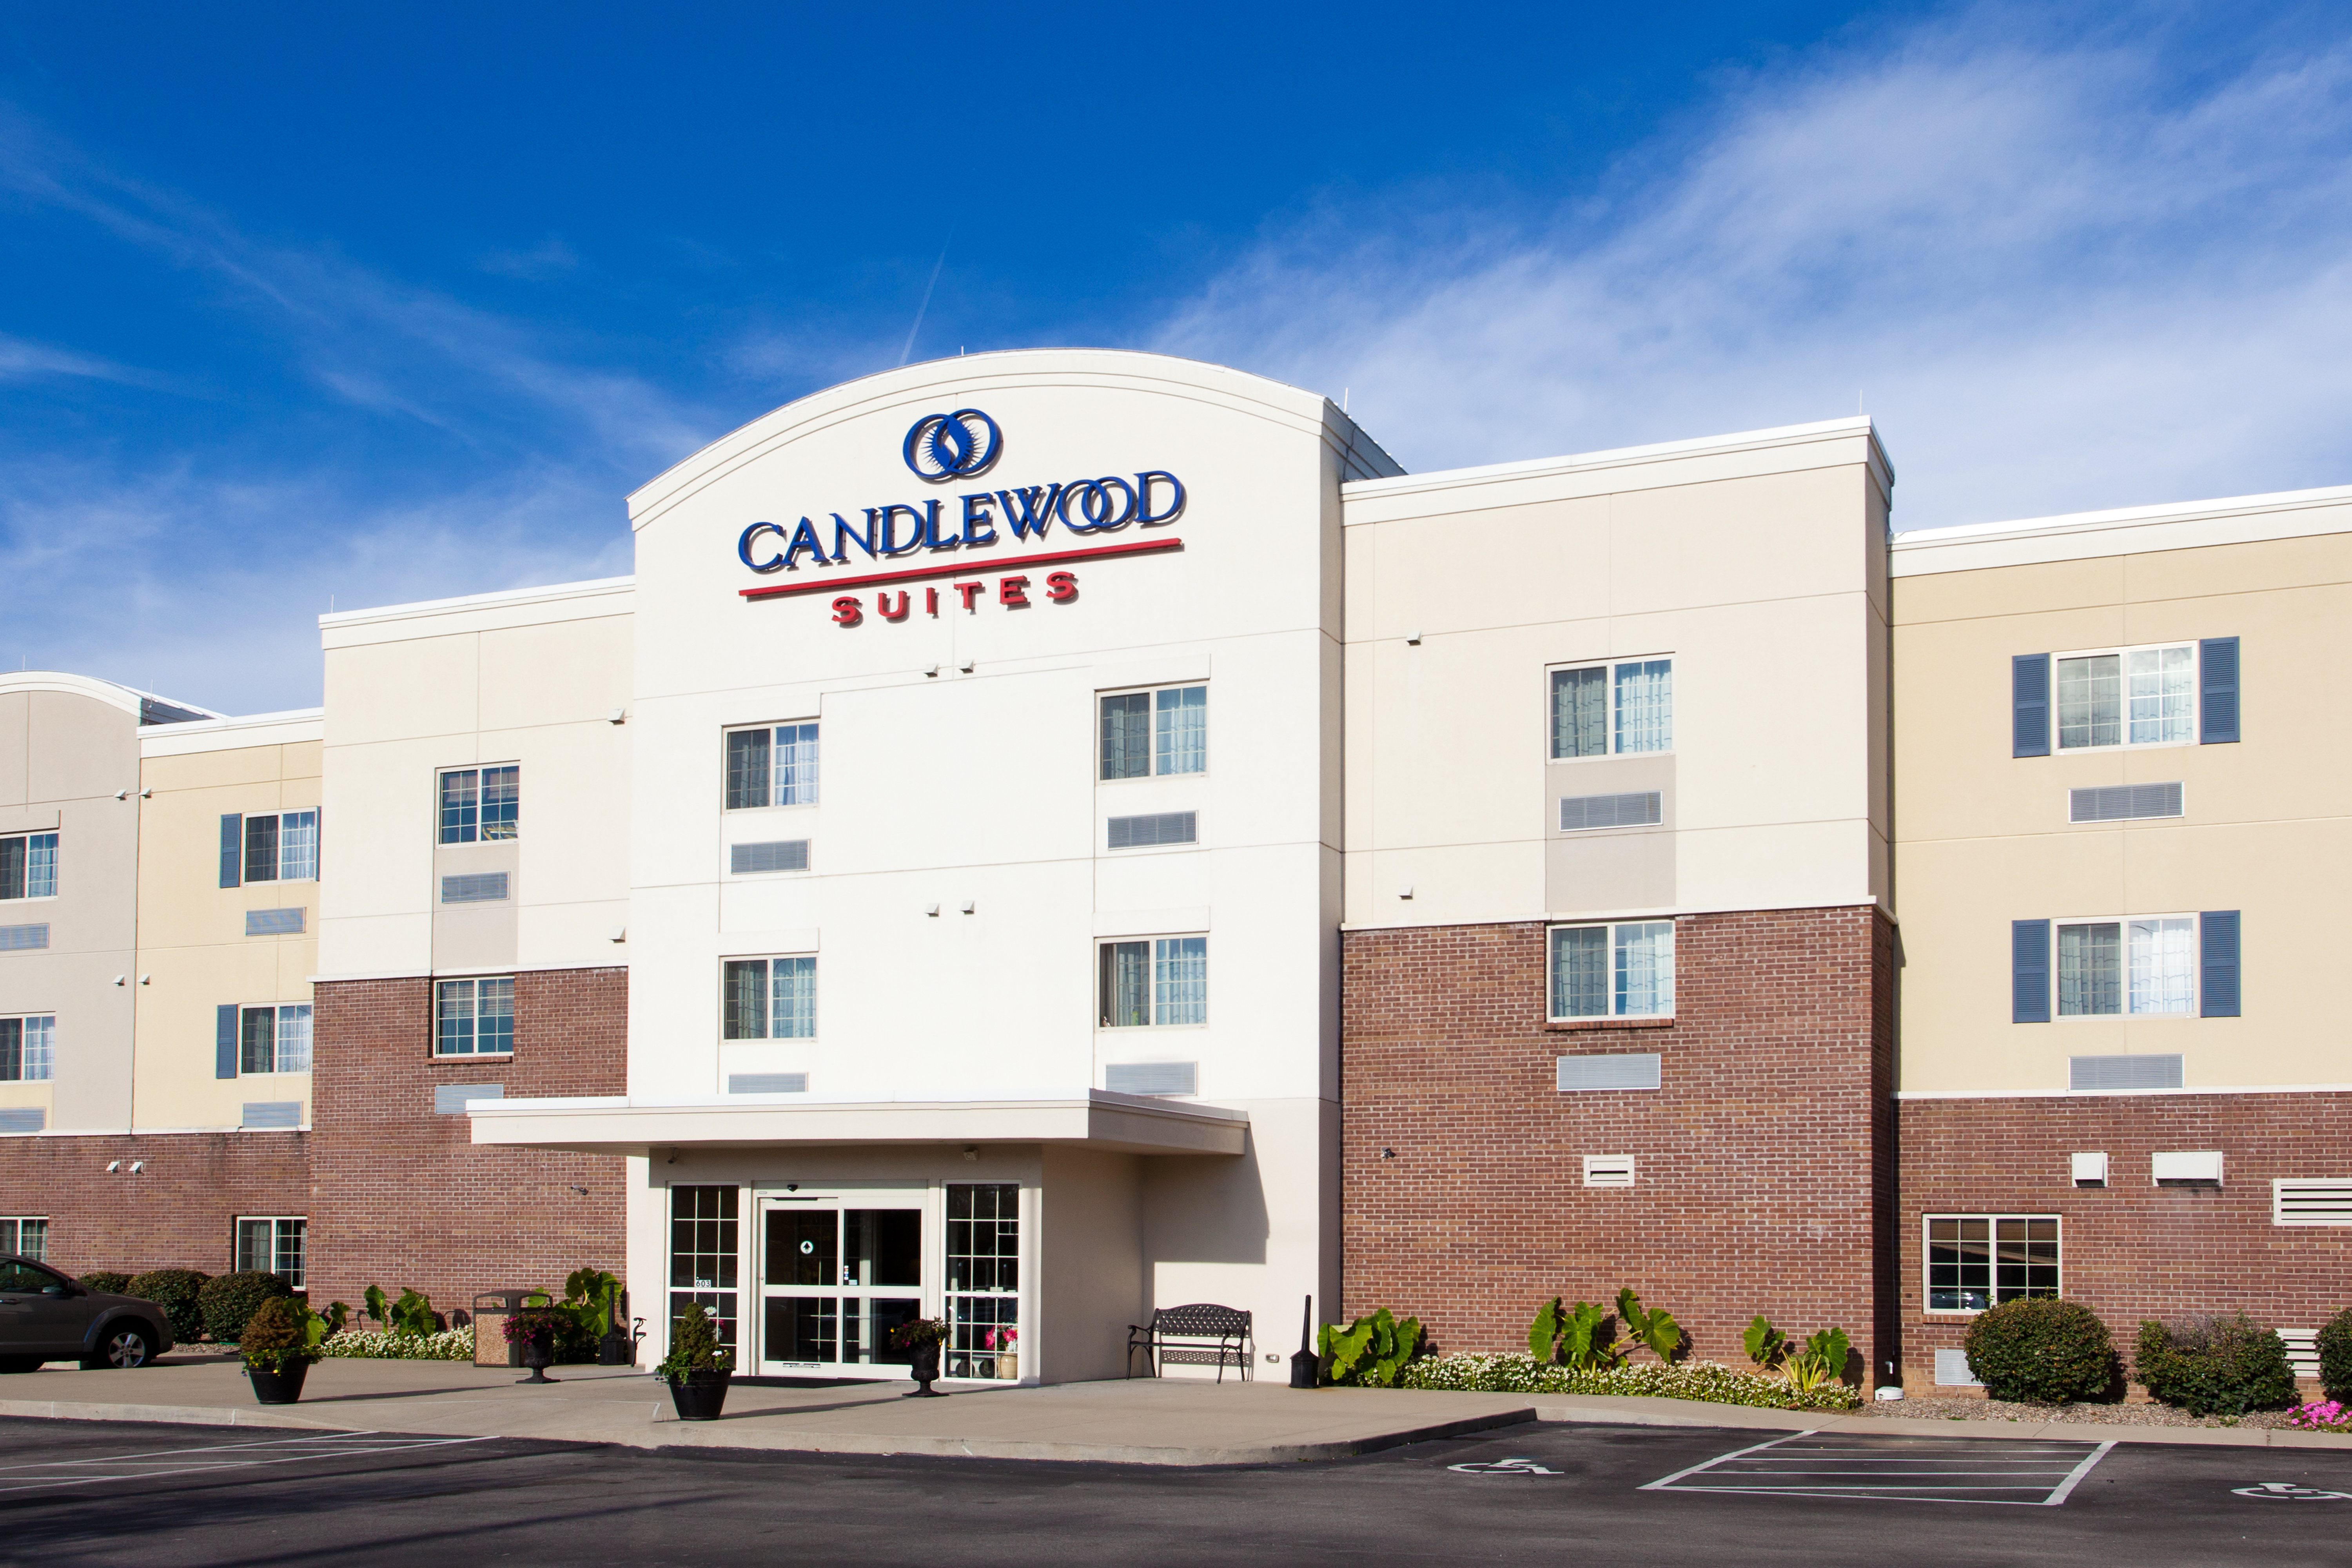 Welcome to Candlewood Suites Lexington, KY